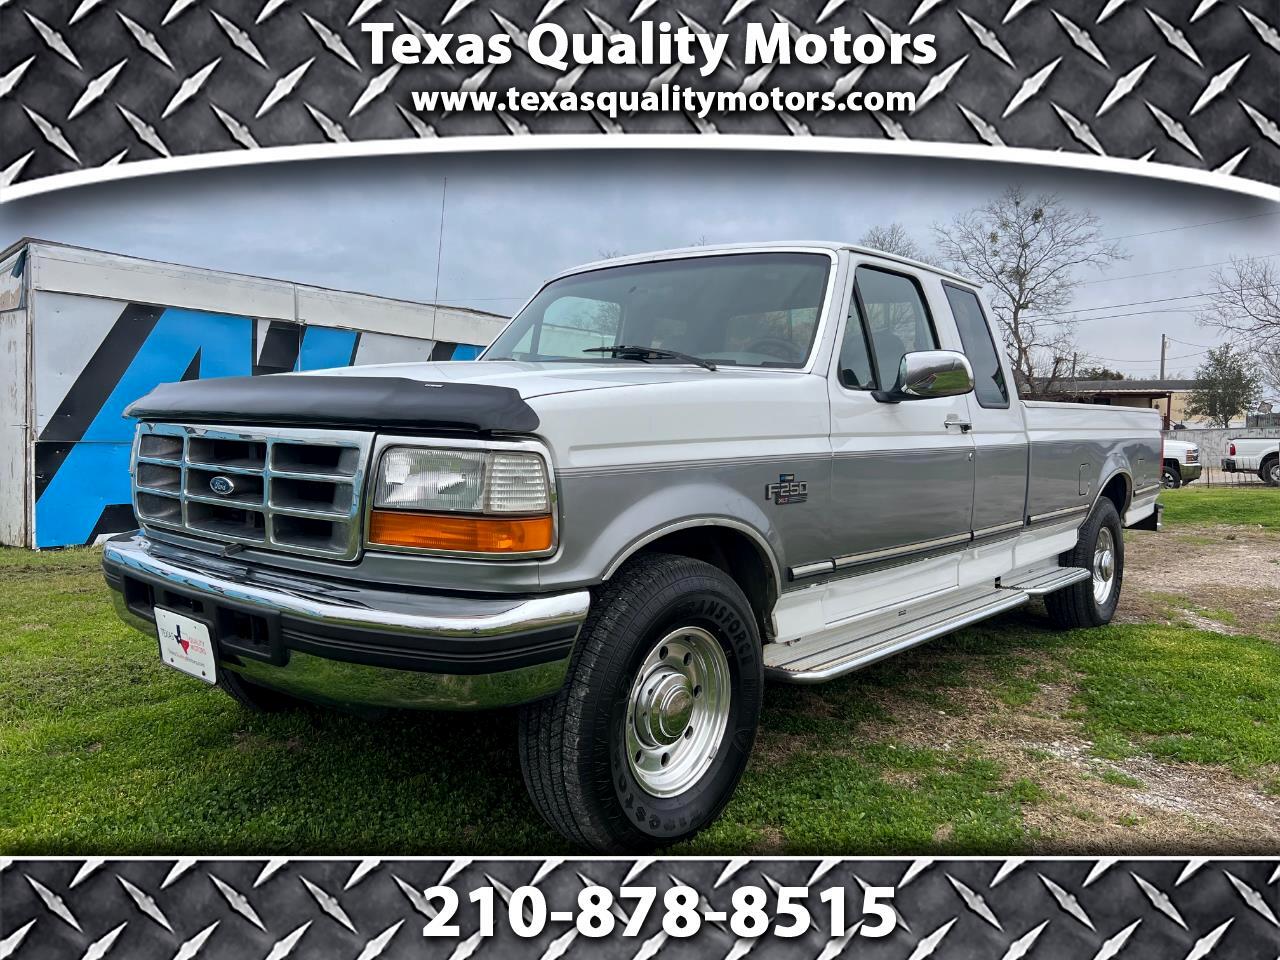 1995 Ford F-250 XLT SuperCab Long Bed 7.3L Diesel 2WD